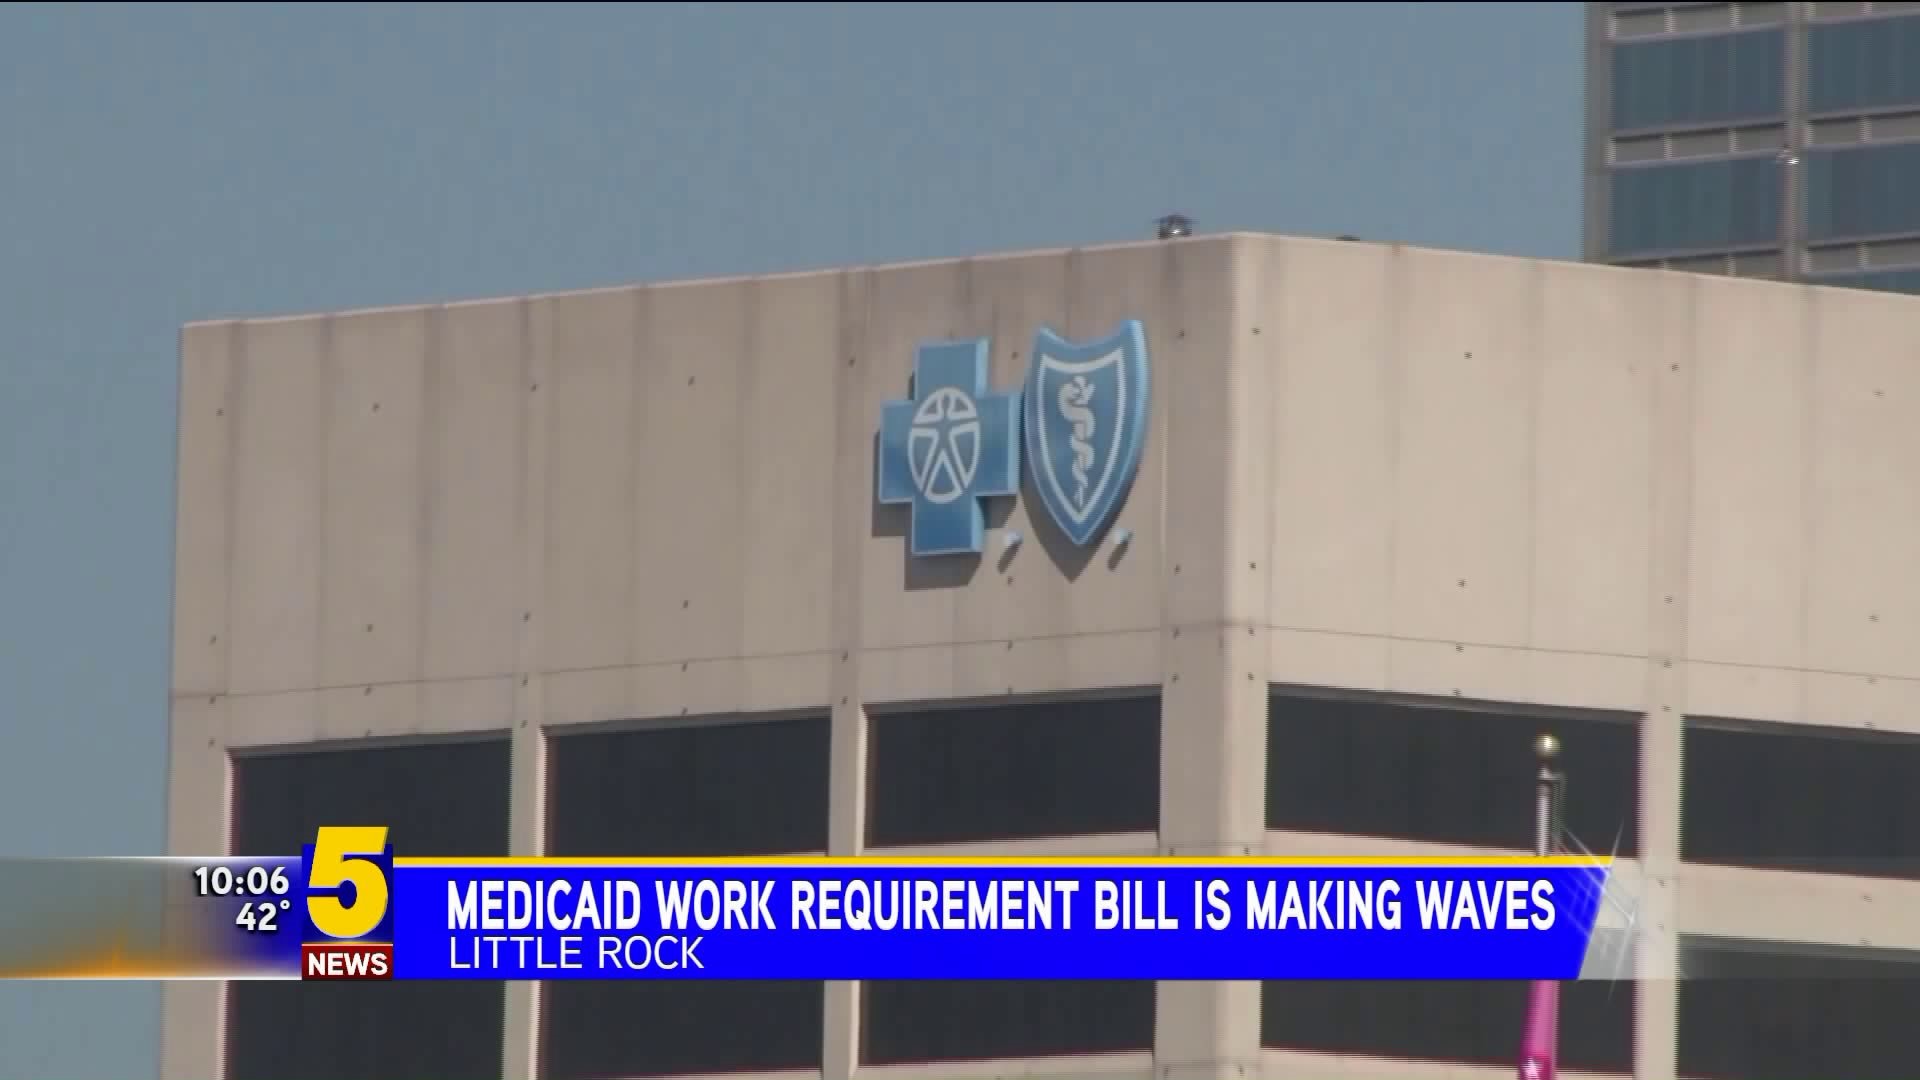 Medicaid Work Requirement Bill Making Waves